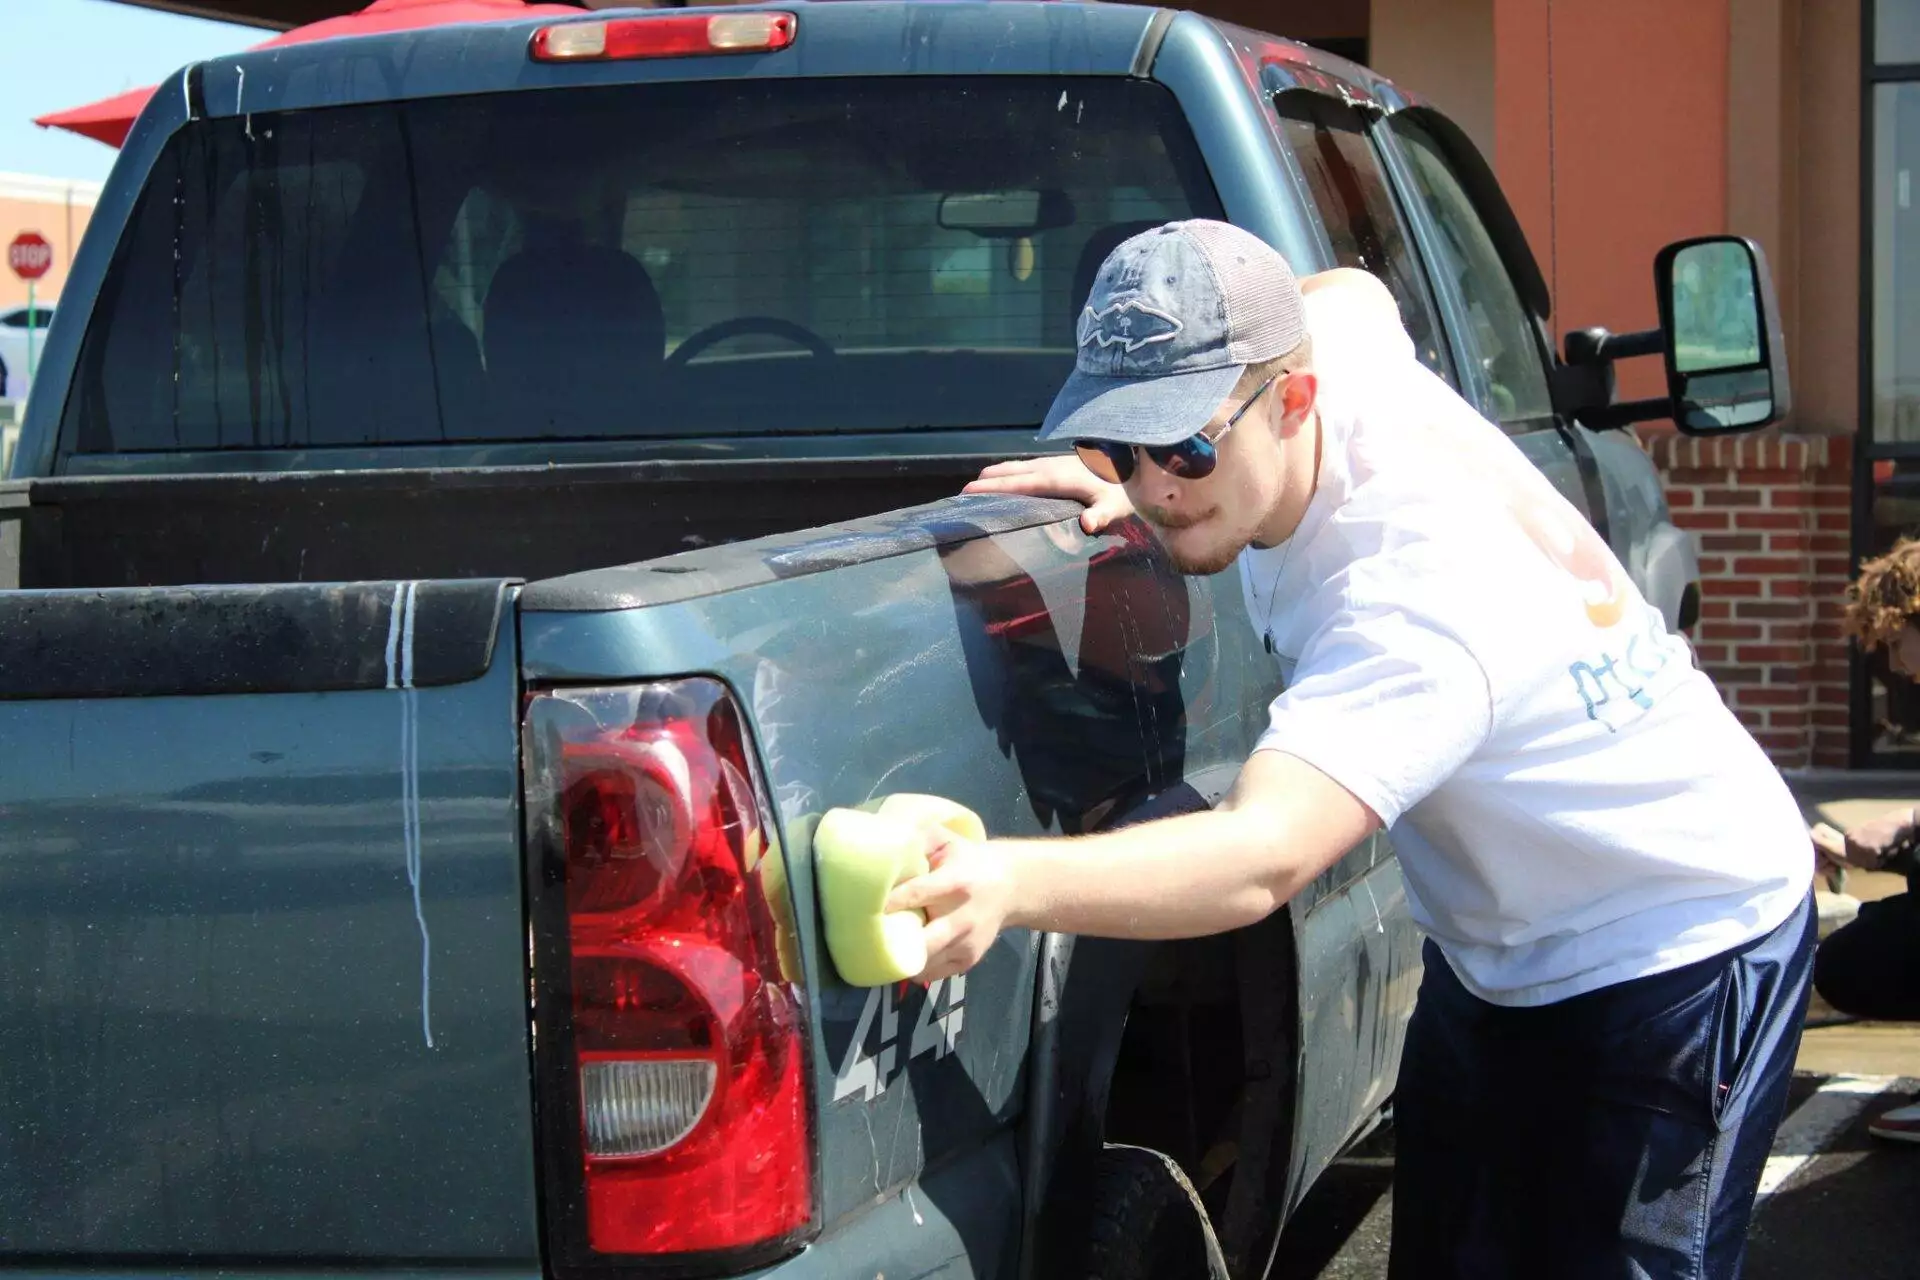 A man in a white t-shirt and cap diligently washing a red pickup truck in a sunny outdoor setting.